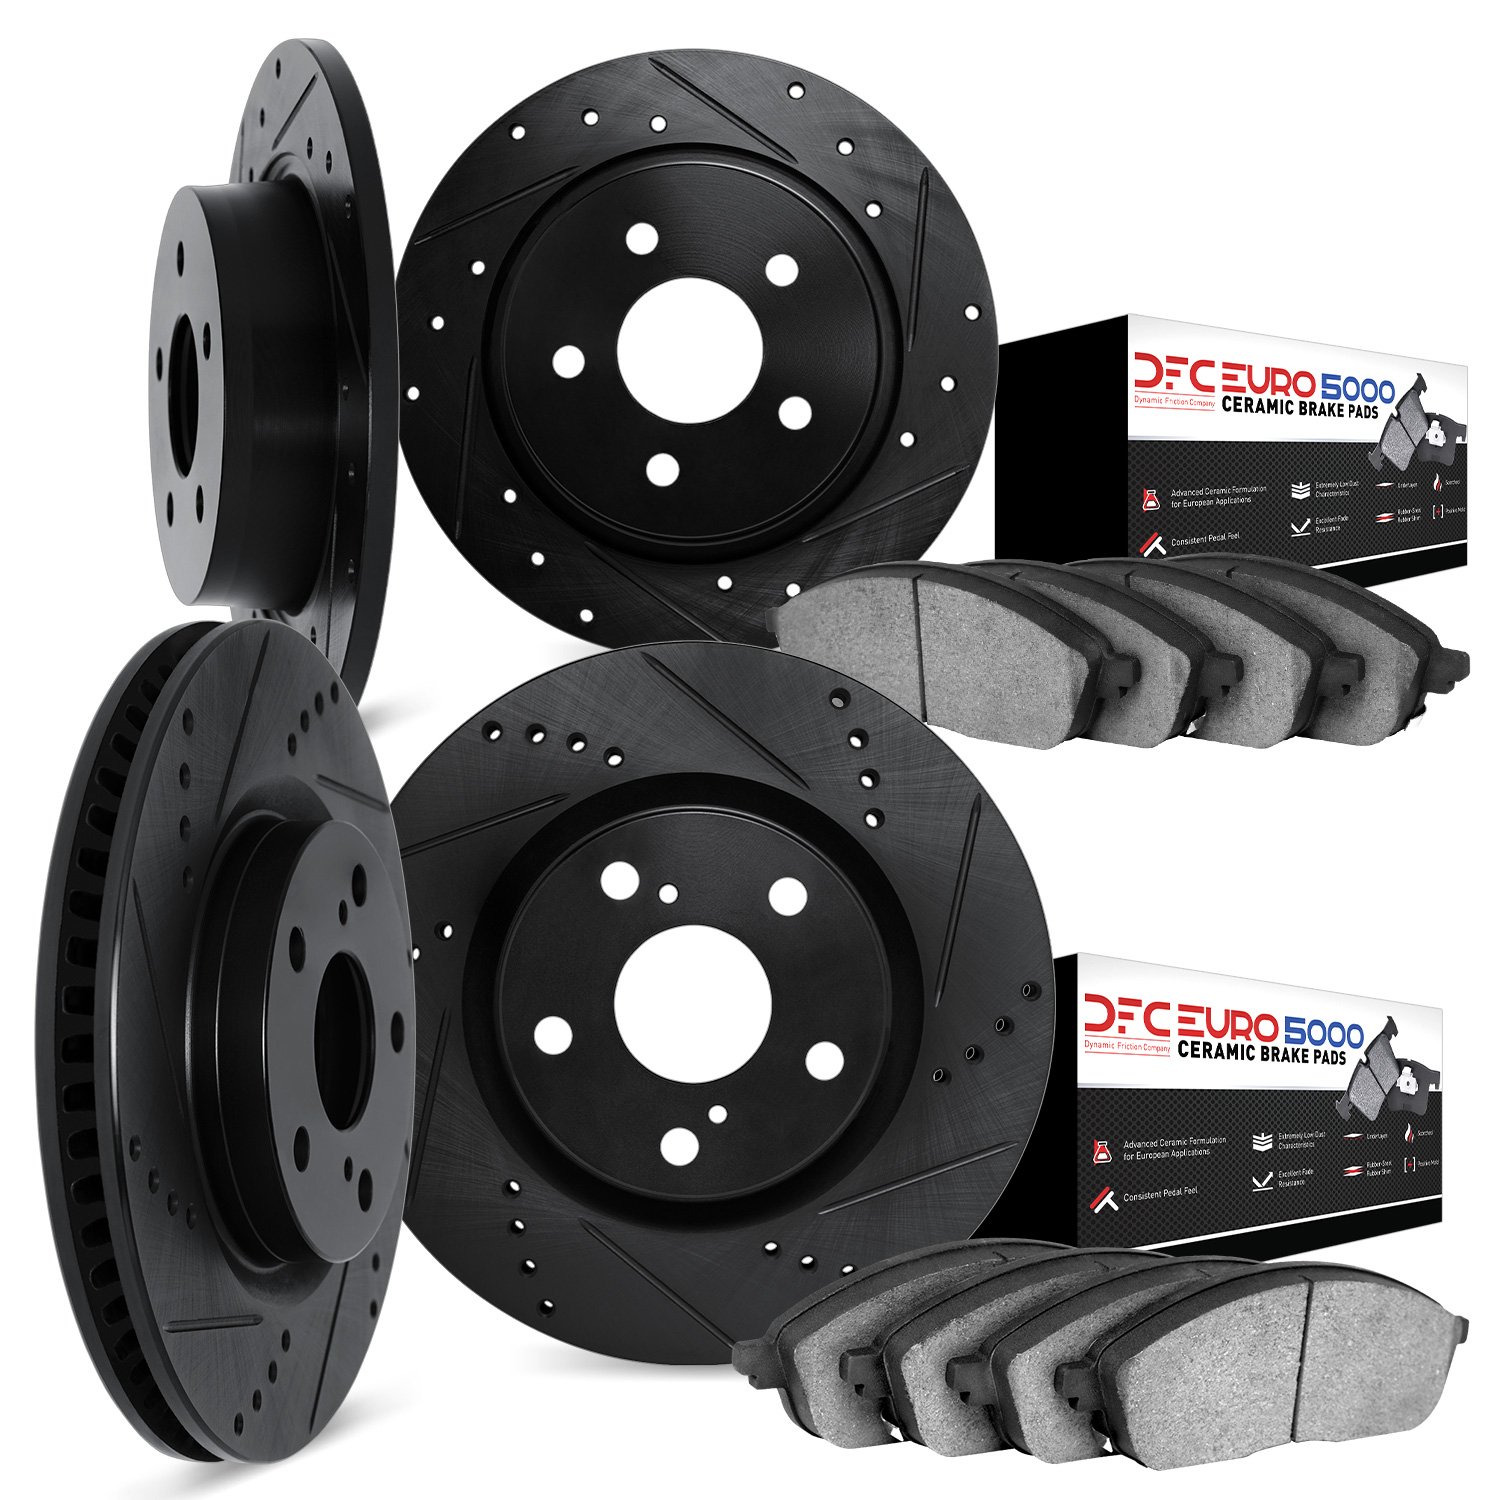 8604-45000 Drilled/Slotted Brake Rotors w/5000 Euro Ceramic Brake Pads Kit [Black], 2006-2010 GM, Position: Front and Rear